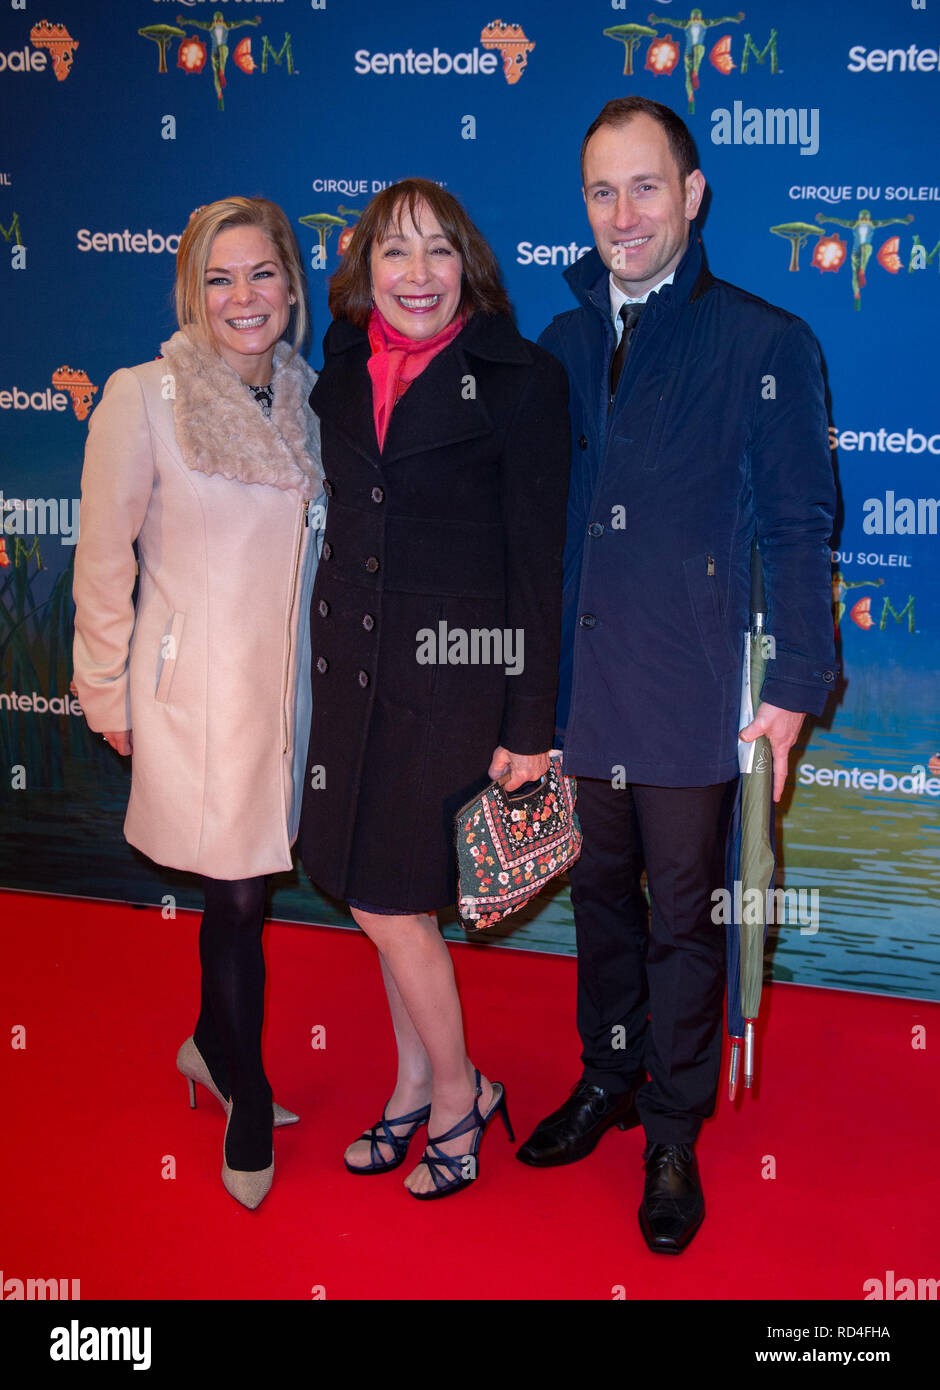 London, United Kingdom. 16 January 2019. Didi Conn arrives for the red carpet premiere of Cirque Du Soleil's 'Totem' held at The Royal Albert Hall. Credit: Peter Manning/Alamy Live News Stock Photo